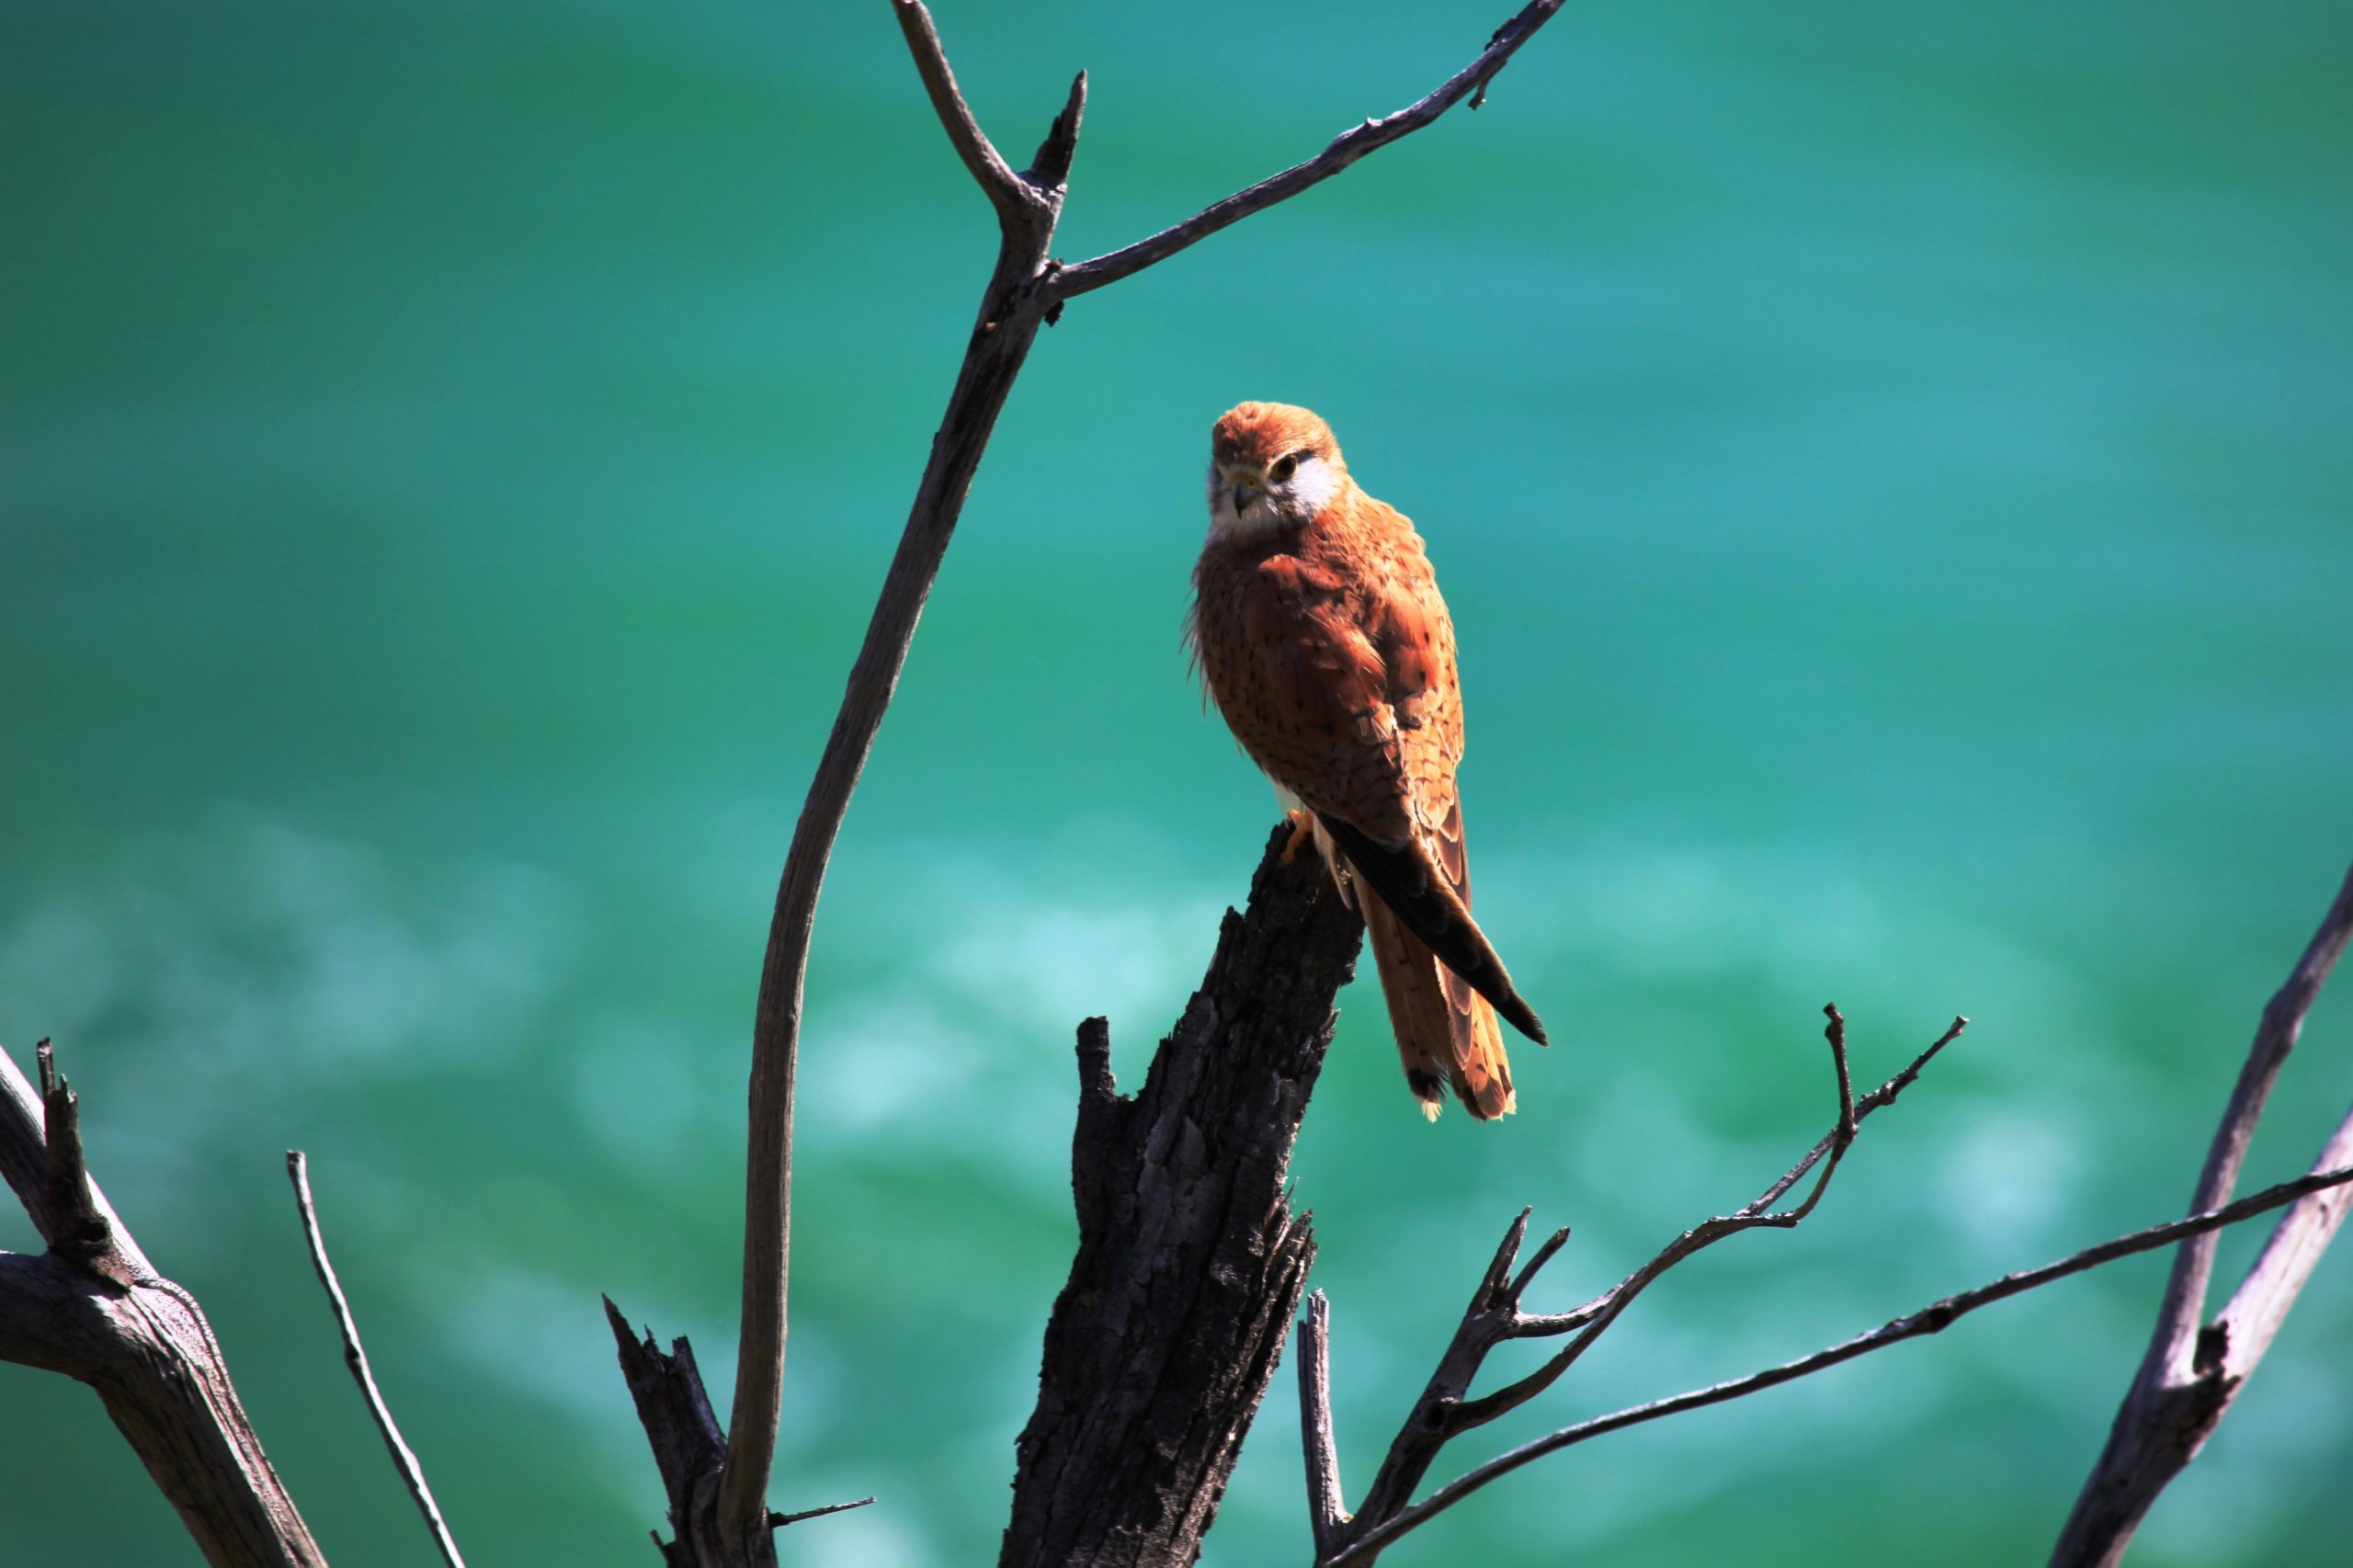 image of a bird perched on a branch against a blue background